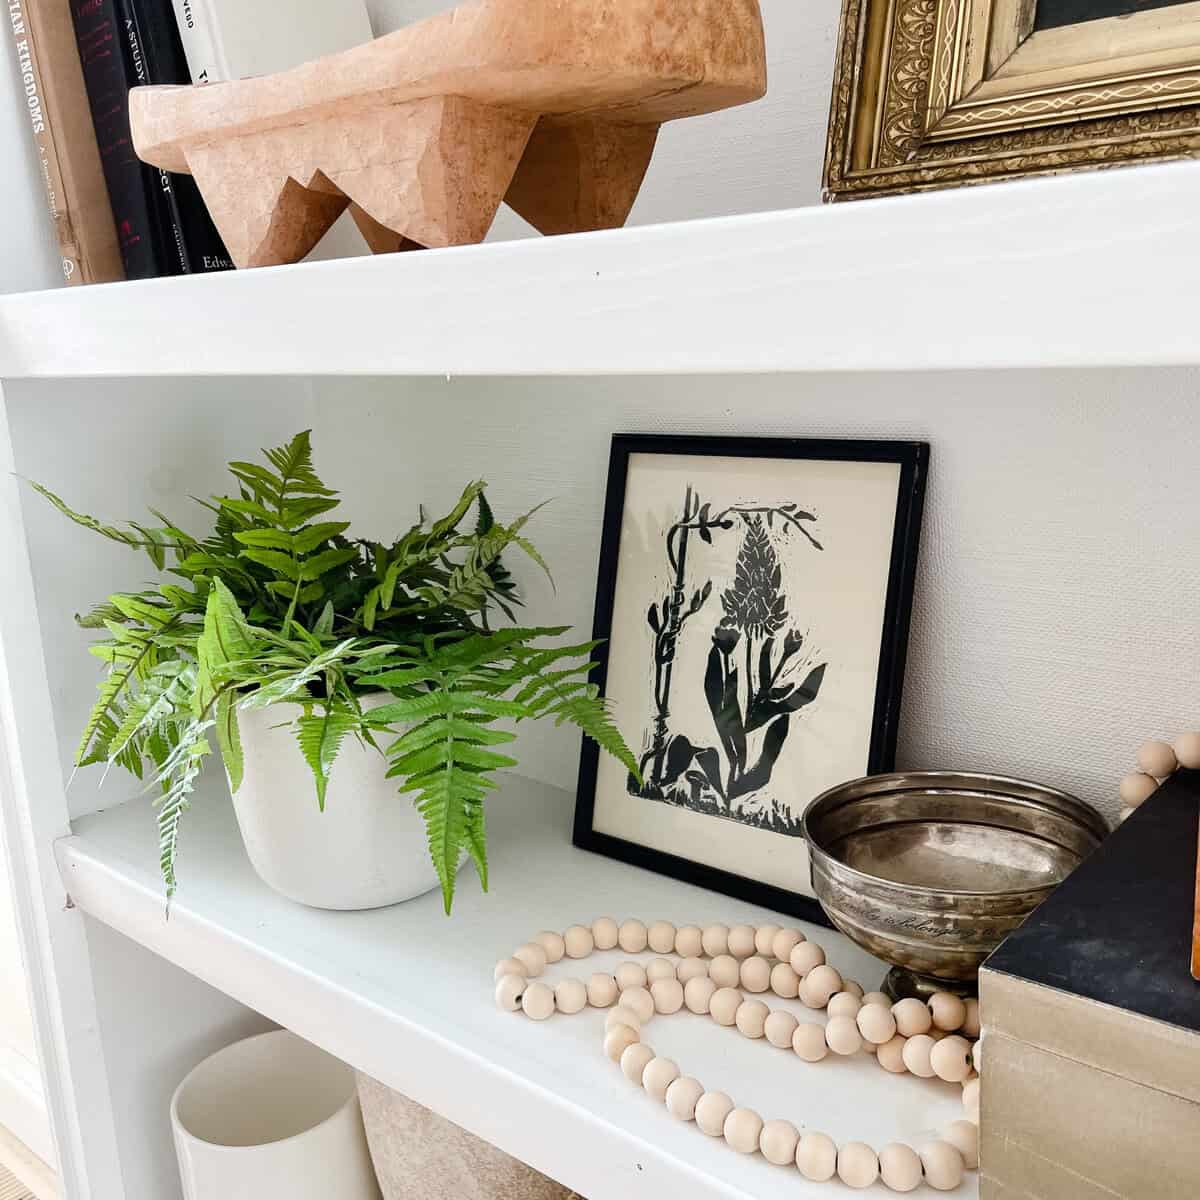 styled bookshelf with home decor accents